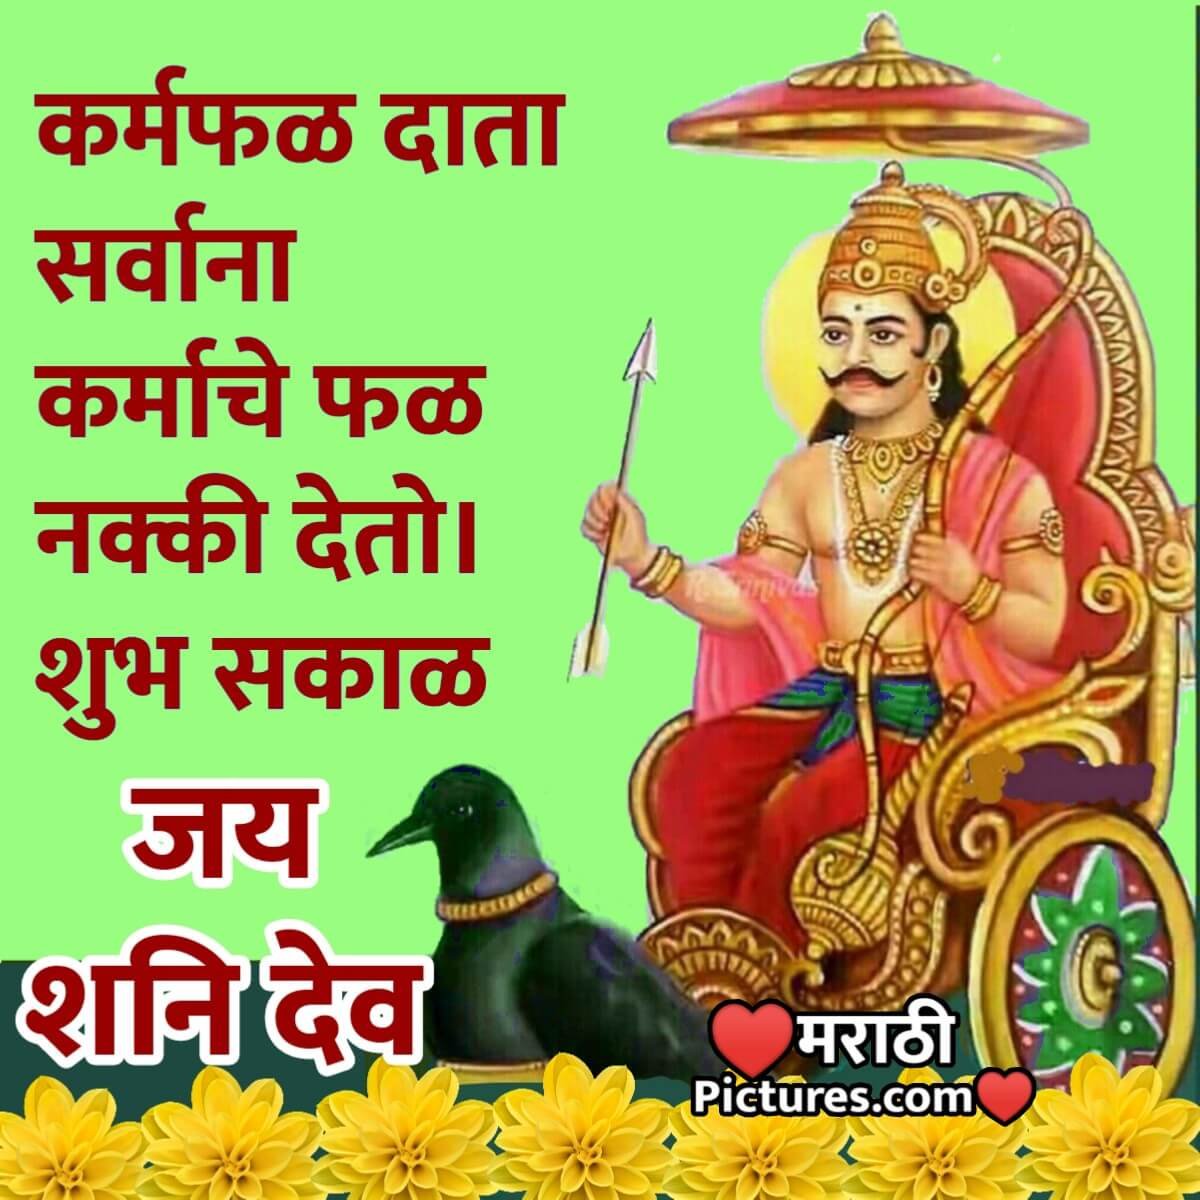 Shubh Sakal Shanidev श भ सक ळ शन द व Images Pictures And Graphics Marathipictures Com